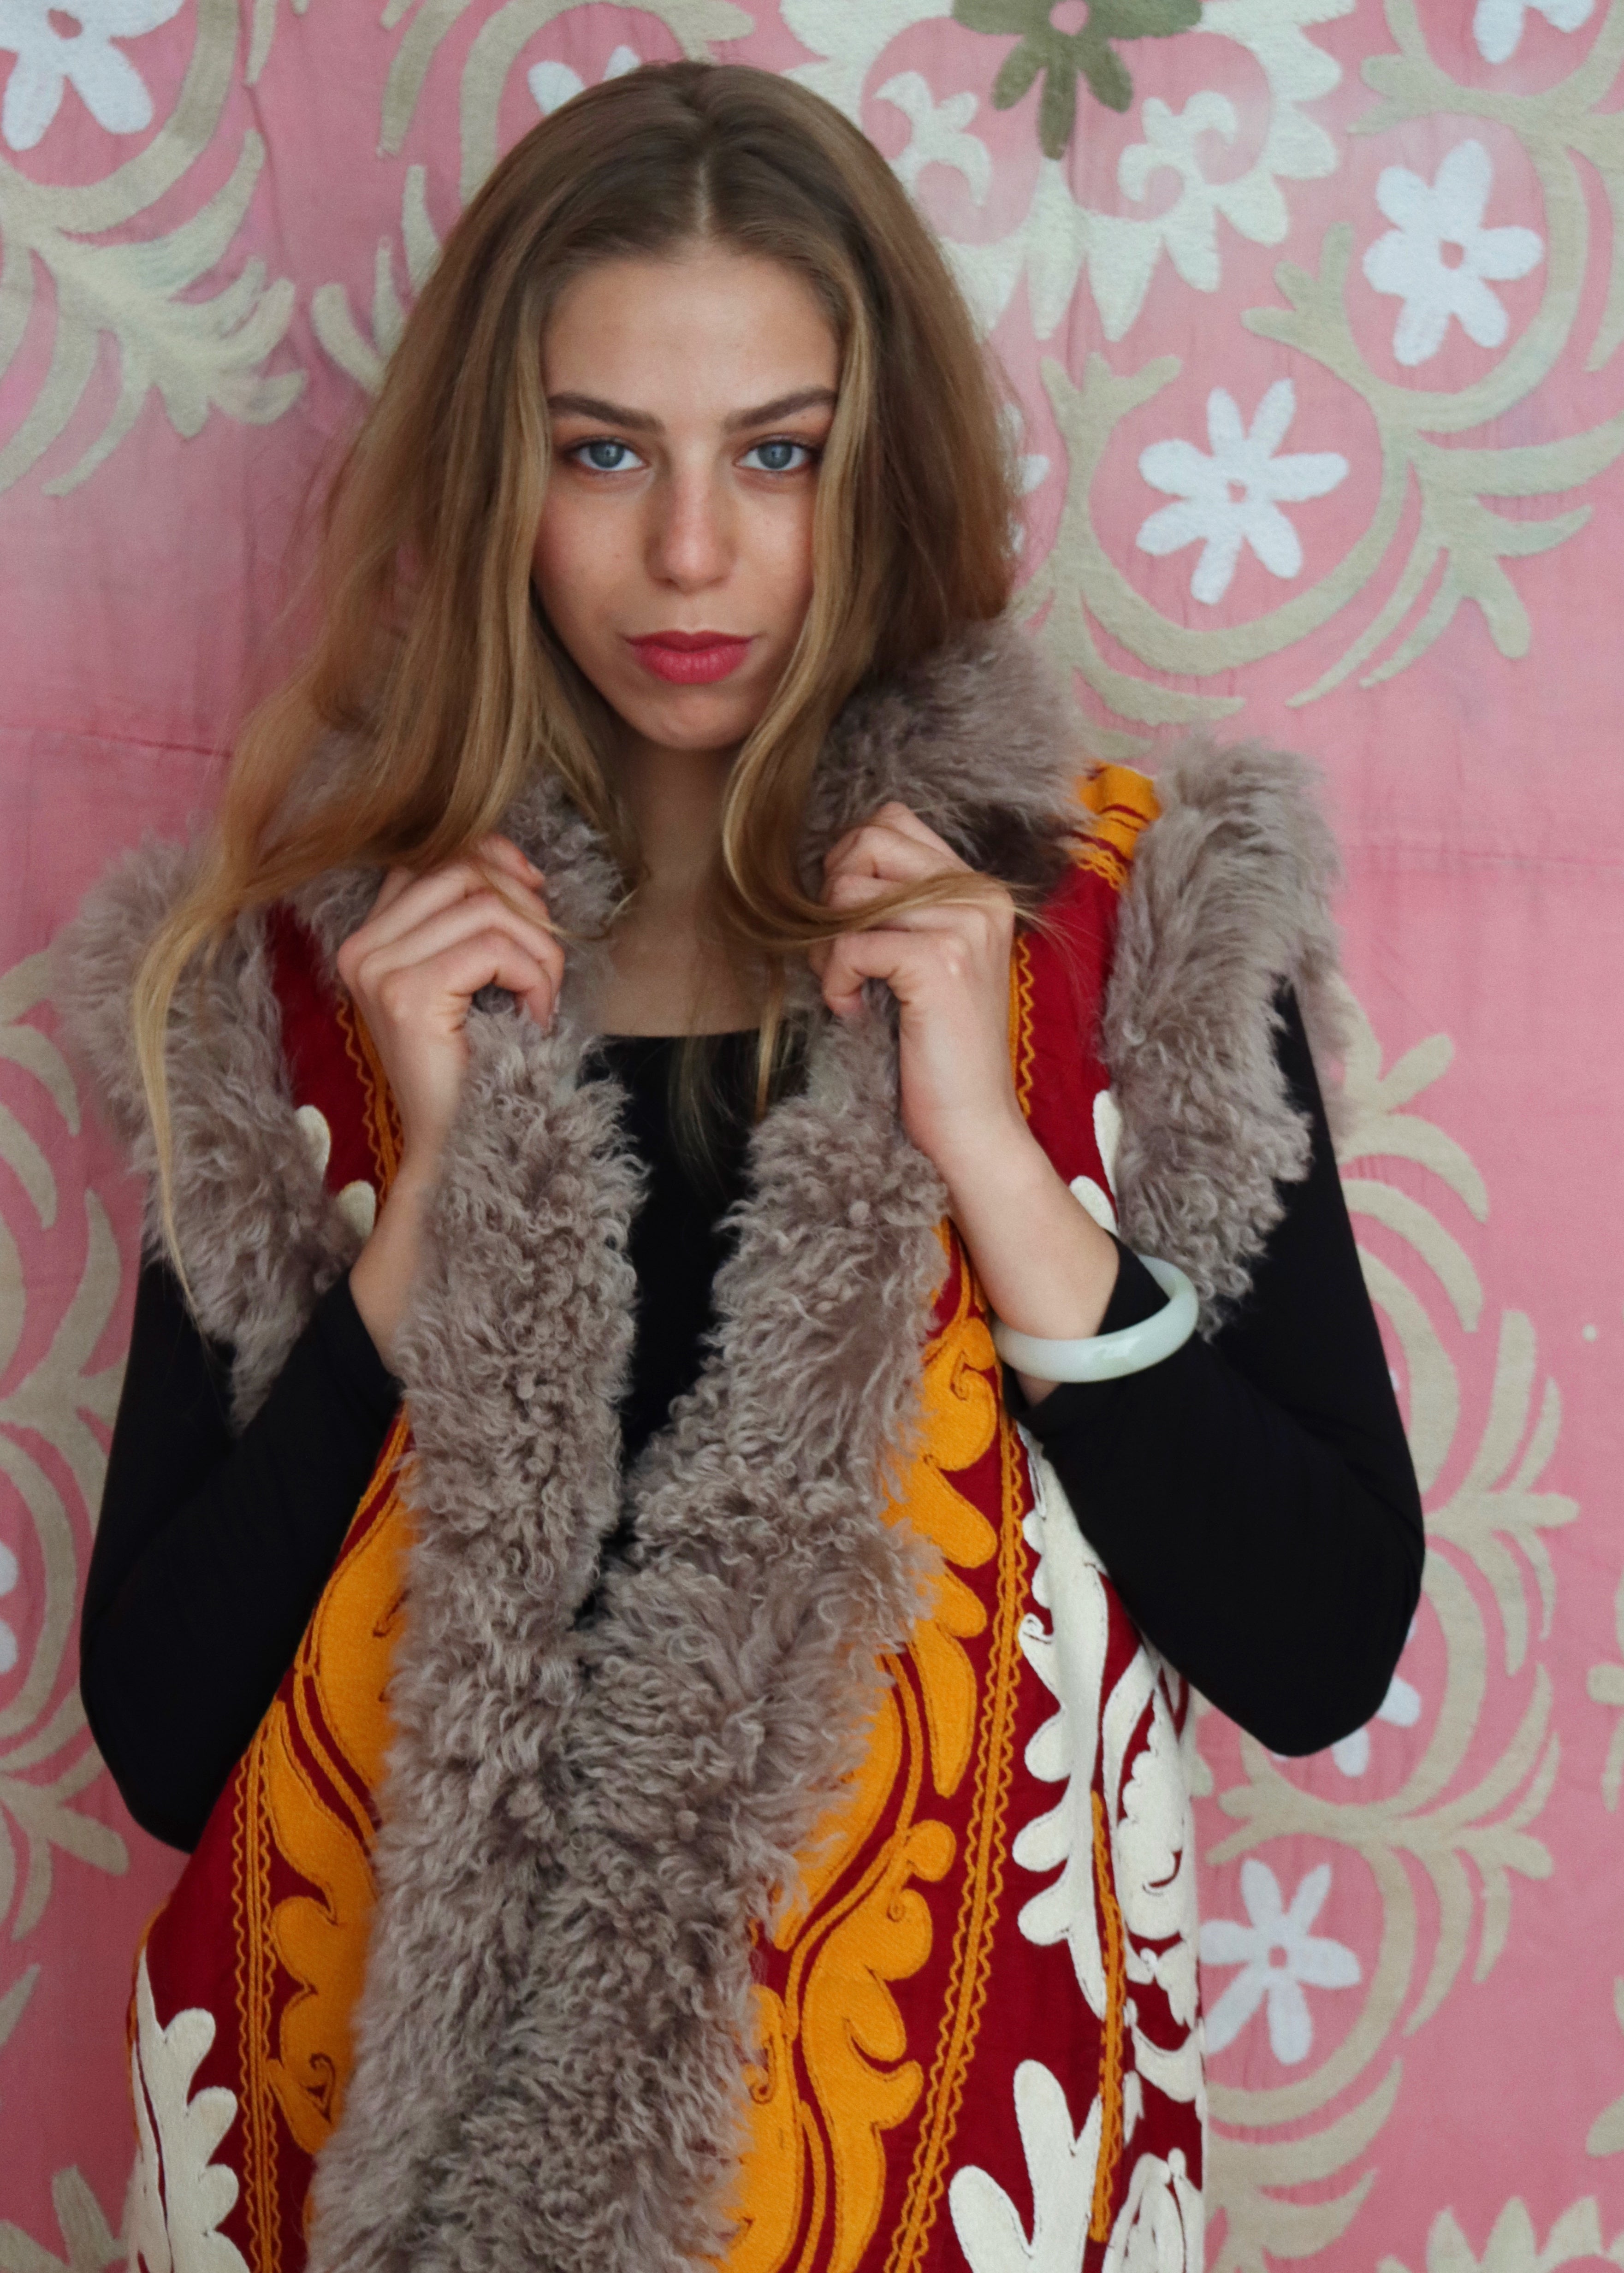 artisan made white orange and red coat with white embroidery